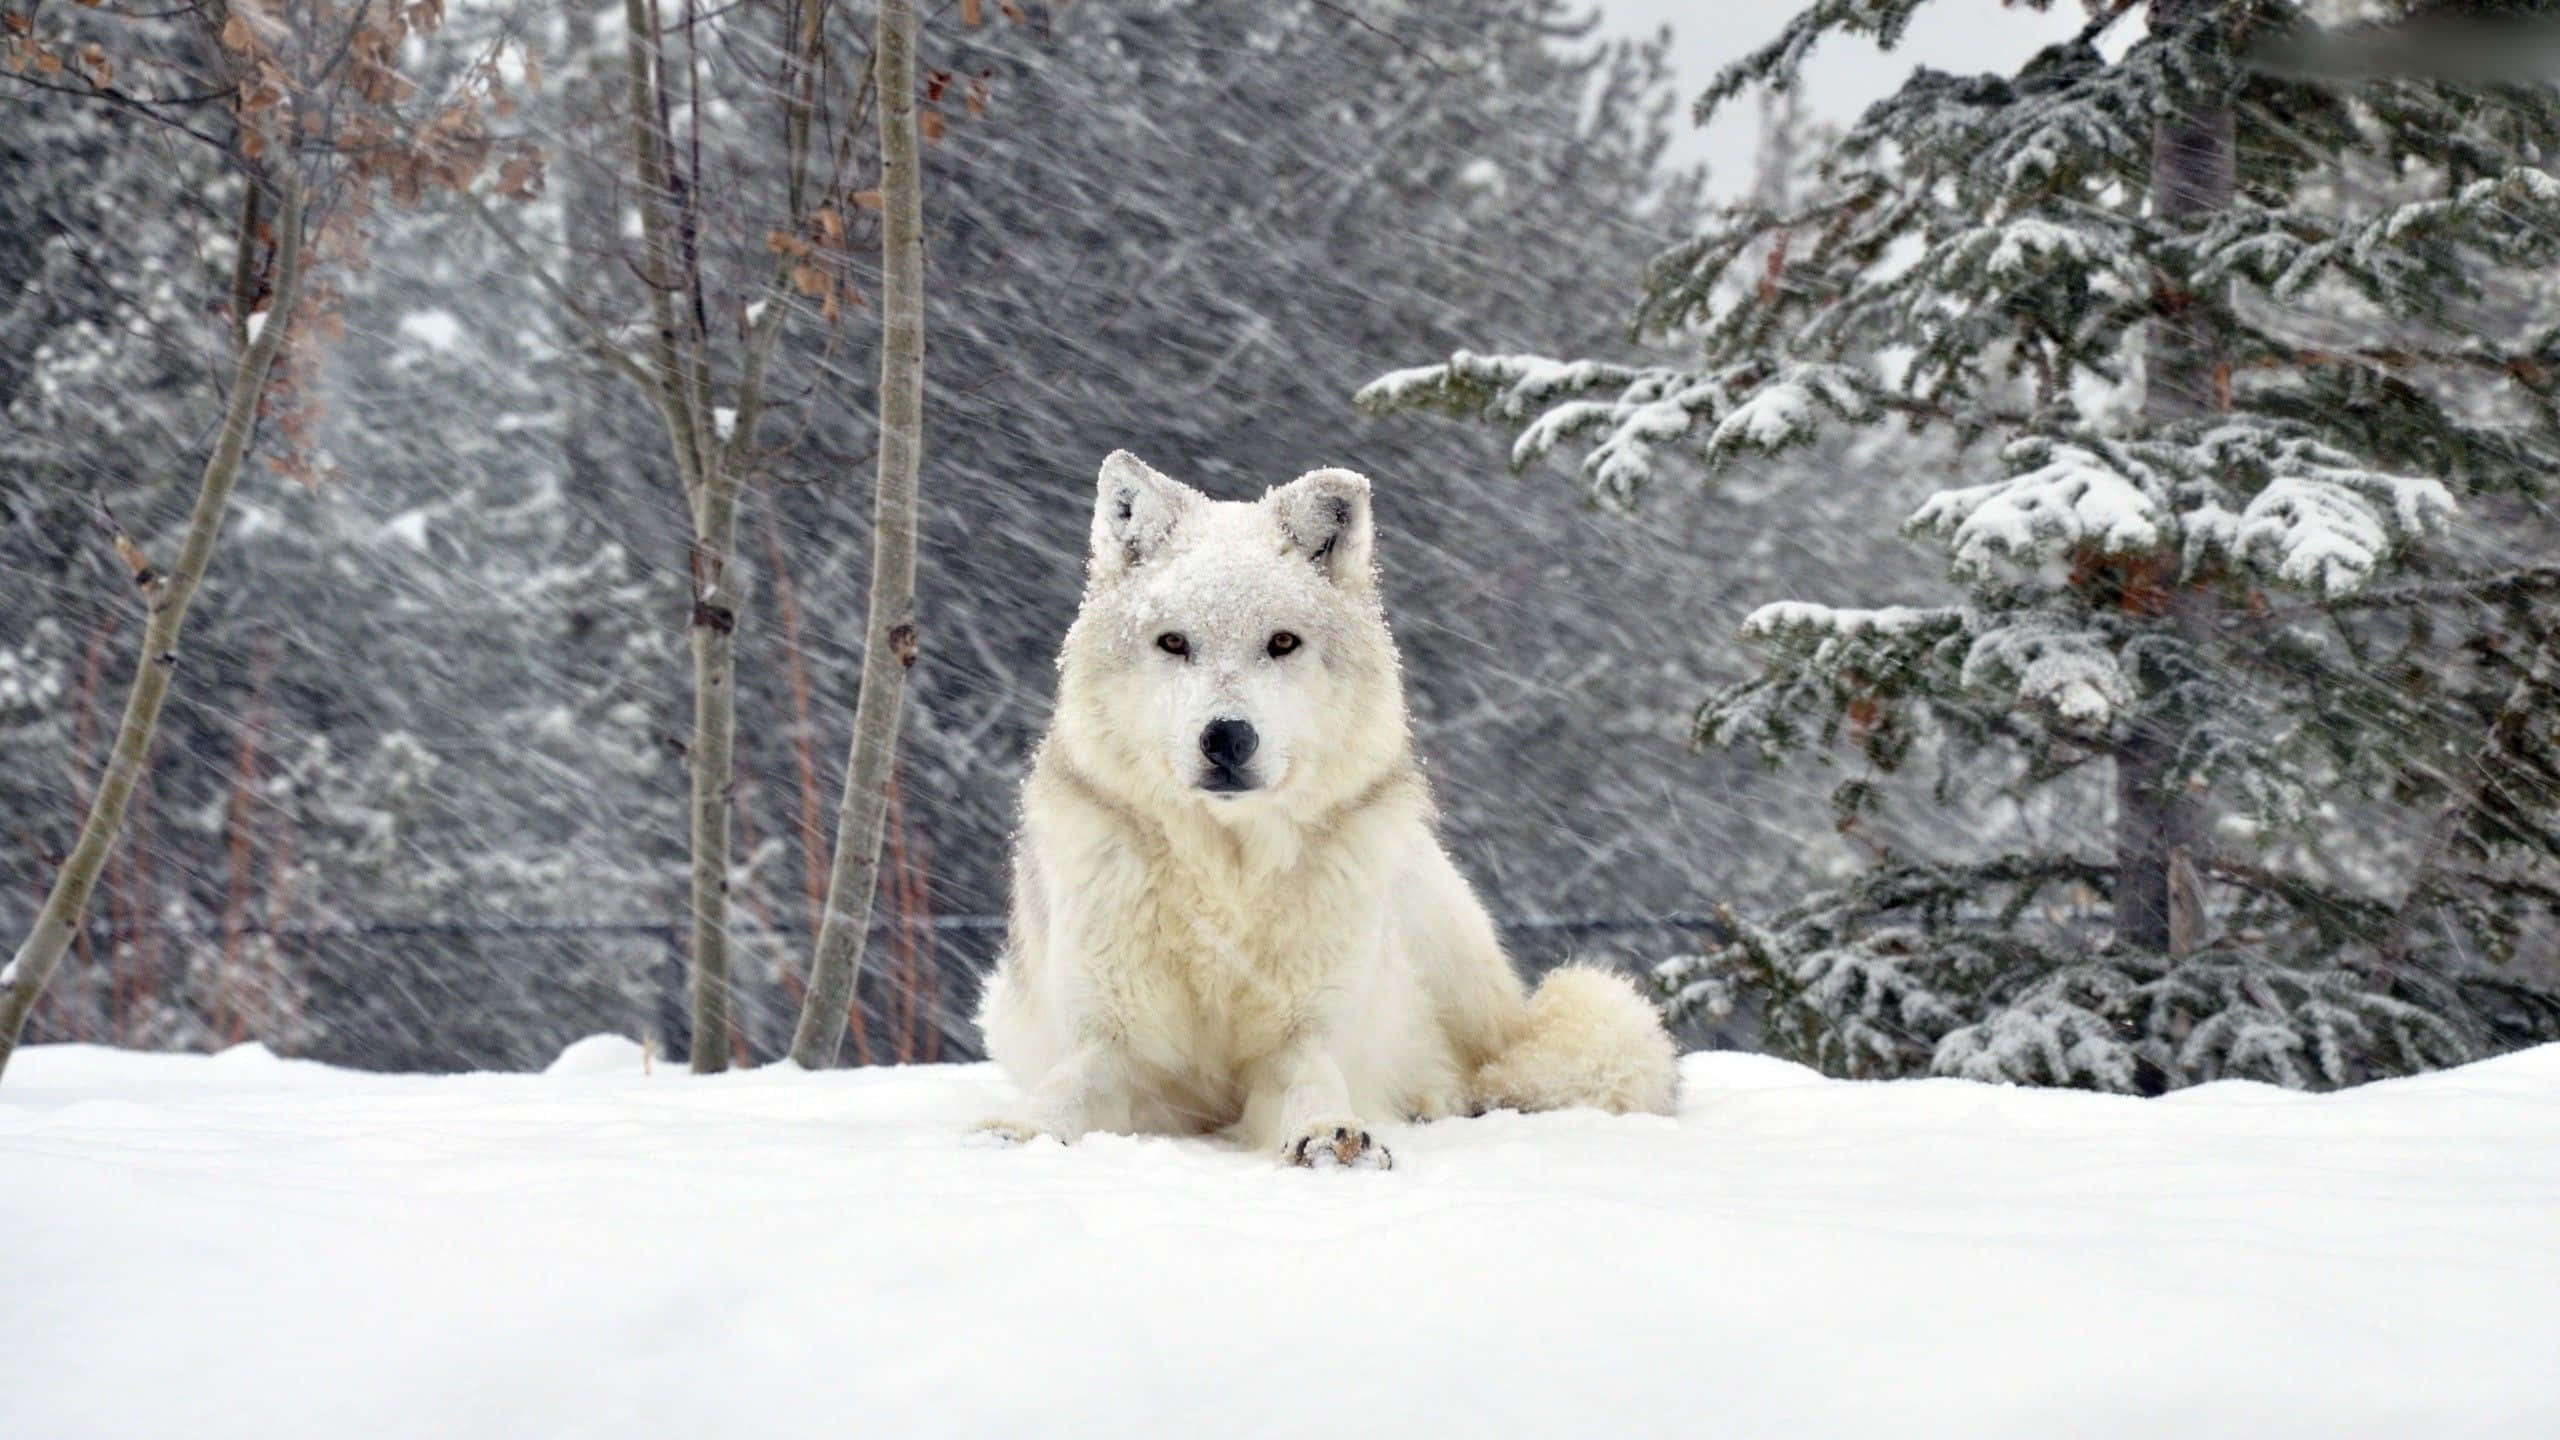 A peaceful cute wolf, in its natural environment.